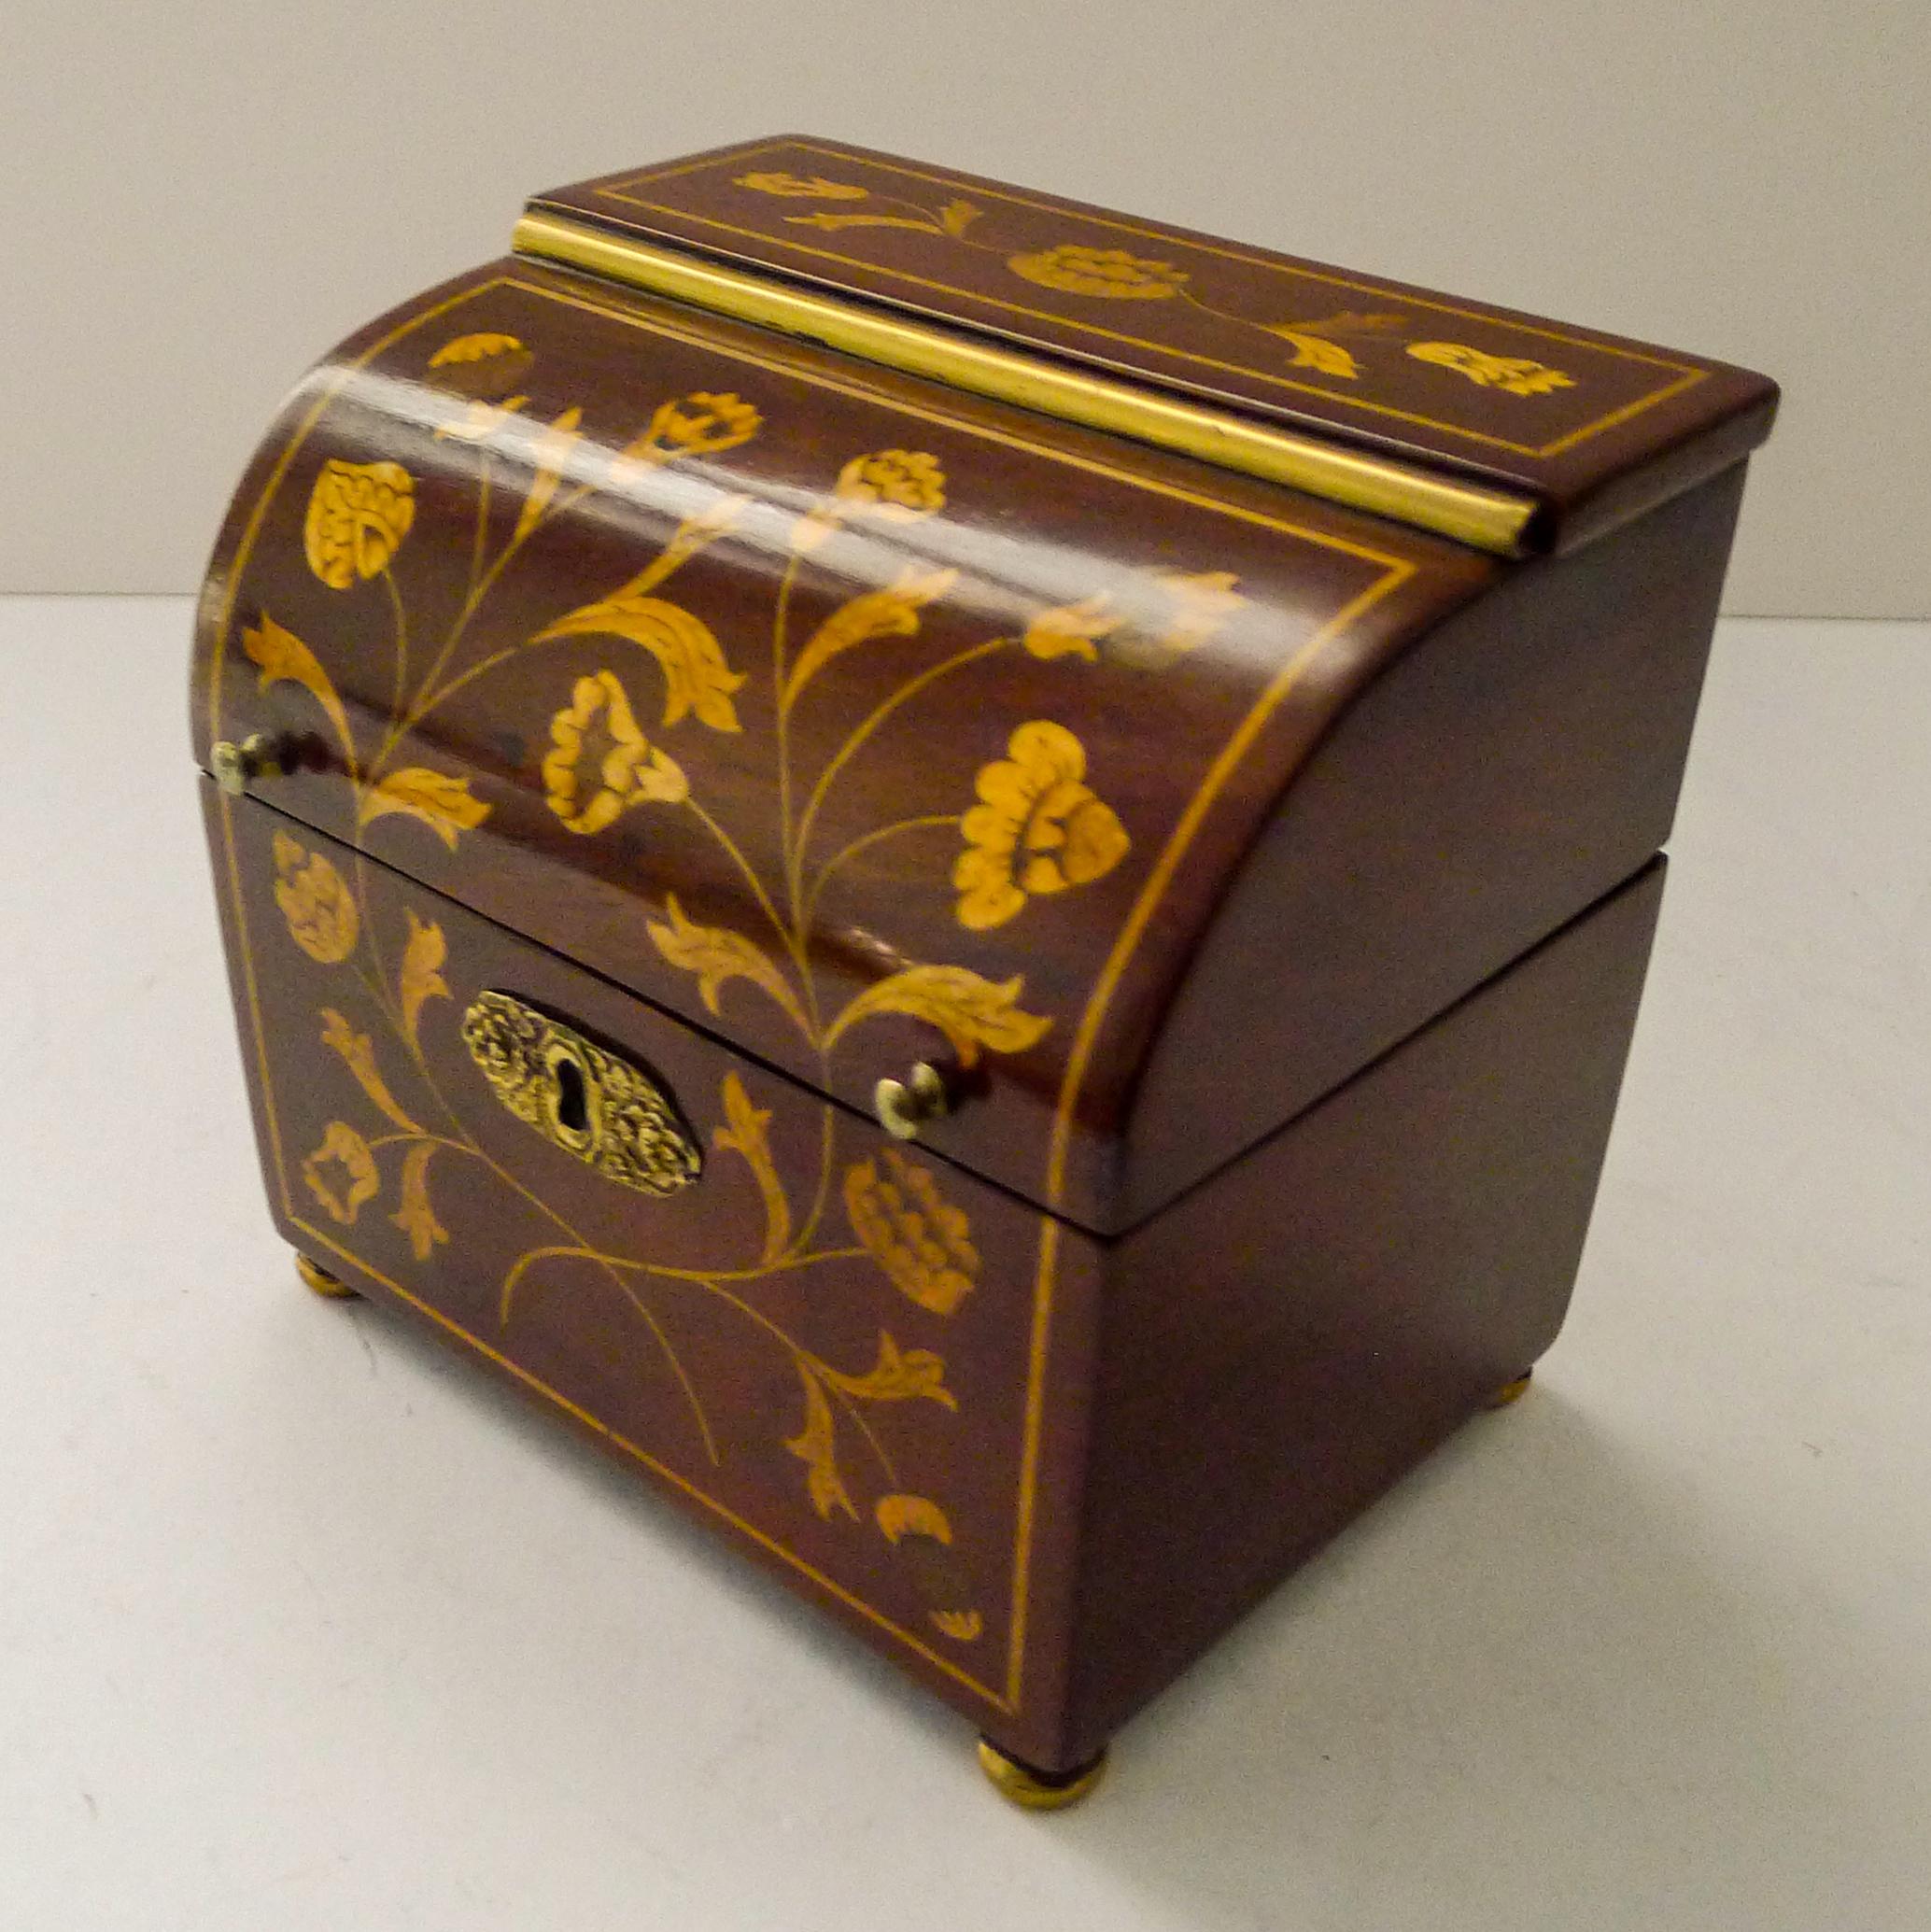 This wonderful early nineteenth century tea caddy was made to emulate the larger decanter boxes made in a similar shape and manor during this period.

Made from Mahogany, the box is beautifully decorated with stunning floral and foliate marquetry